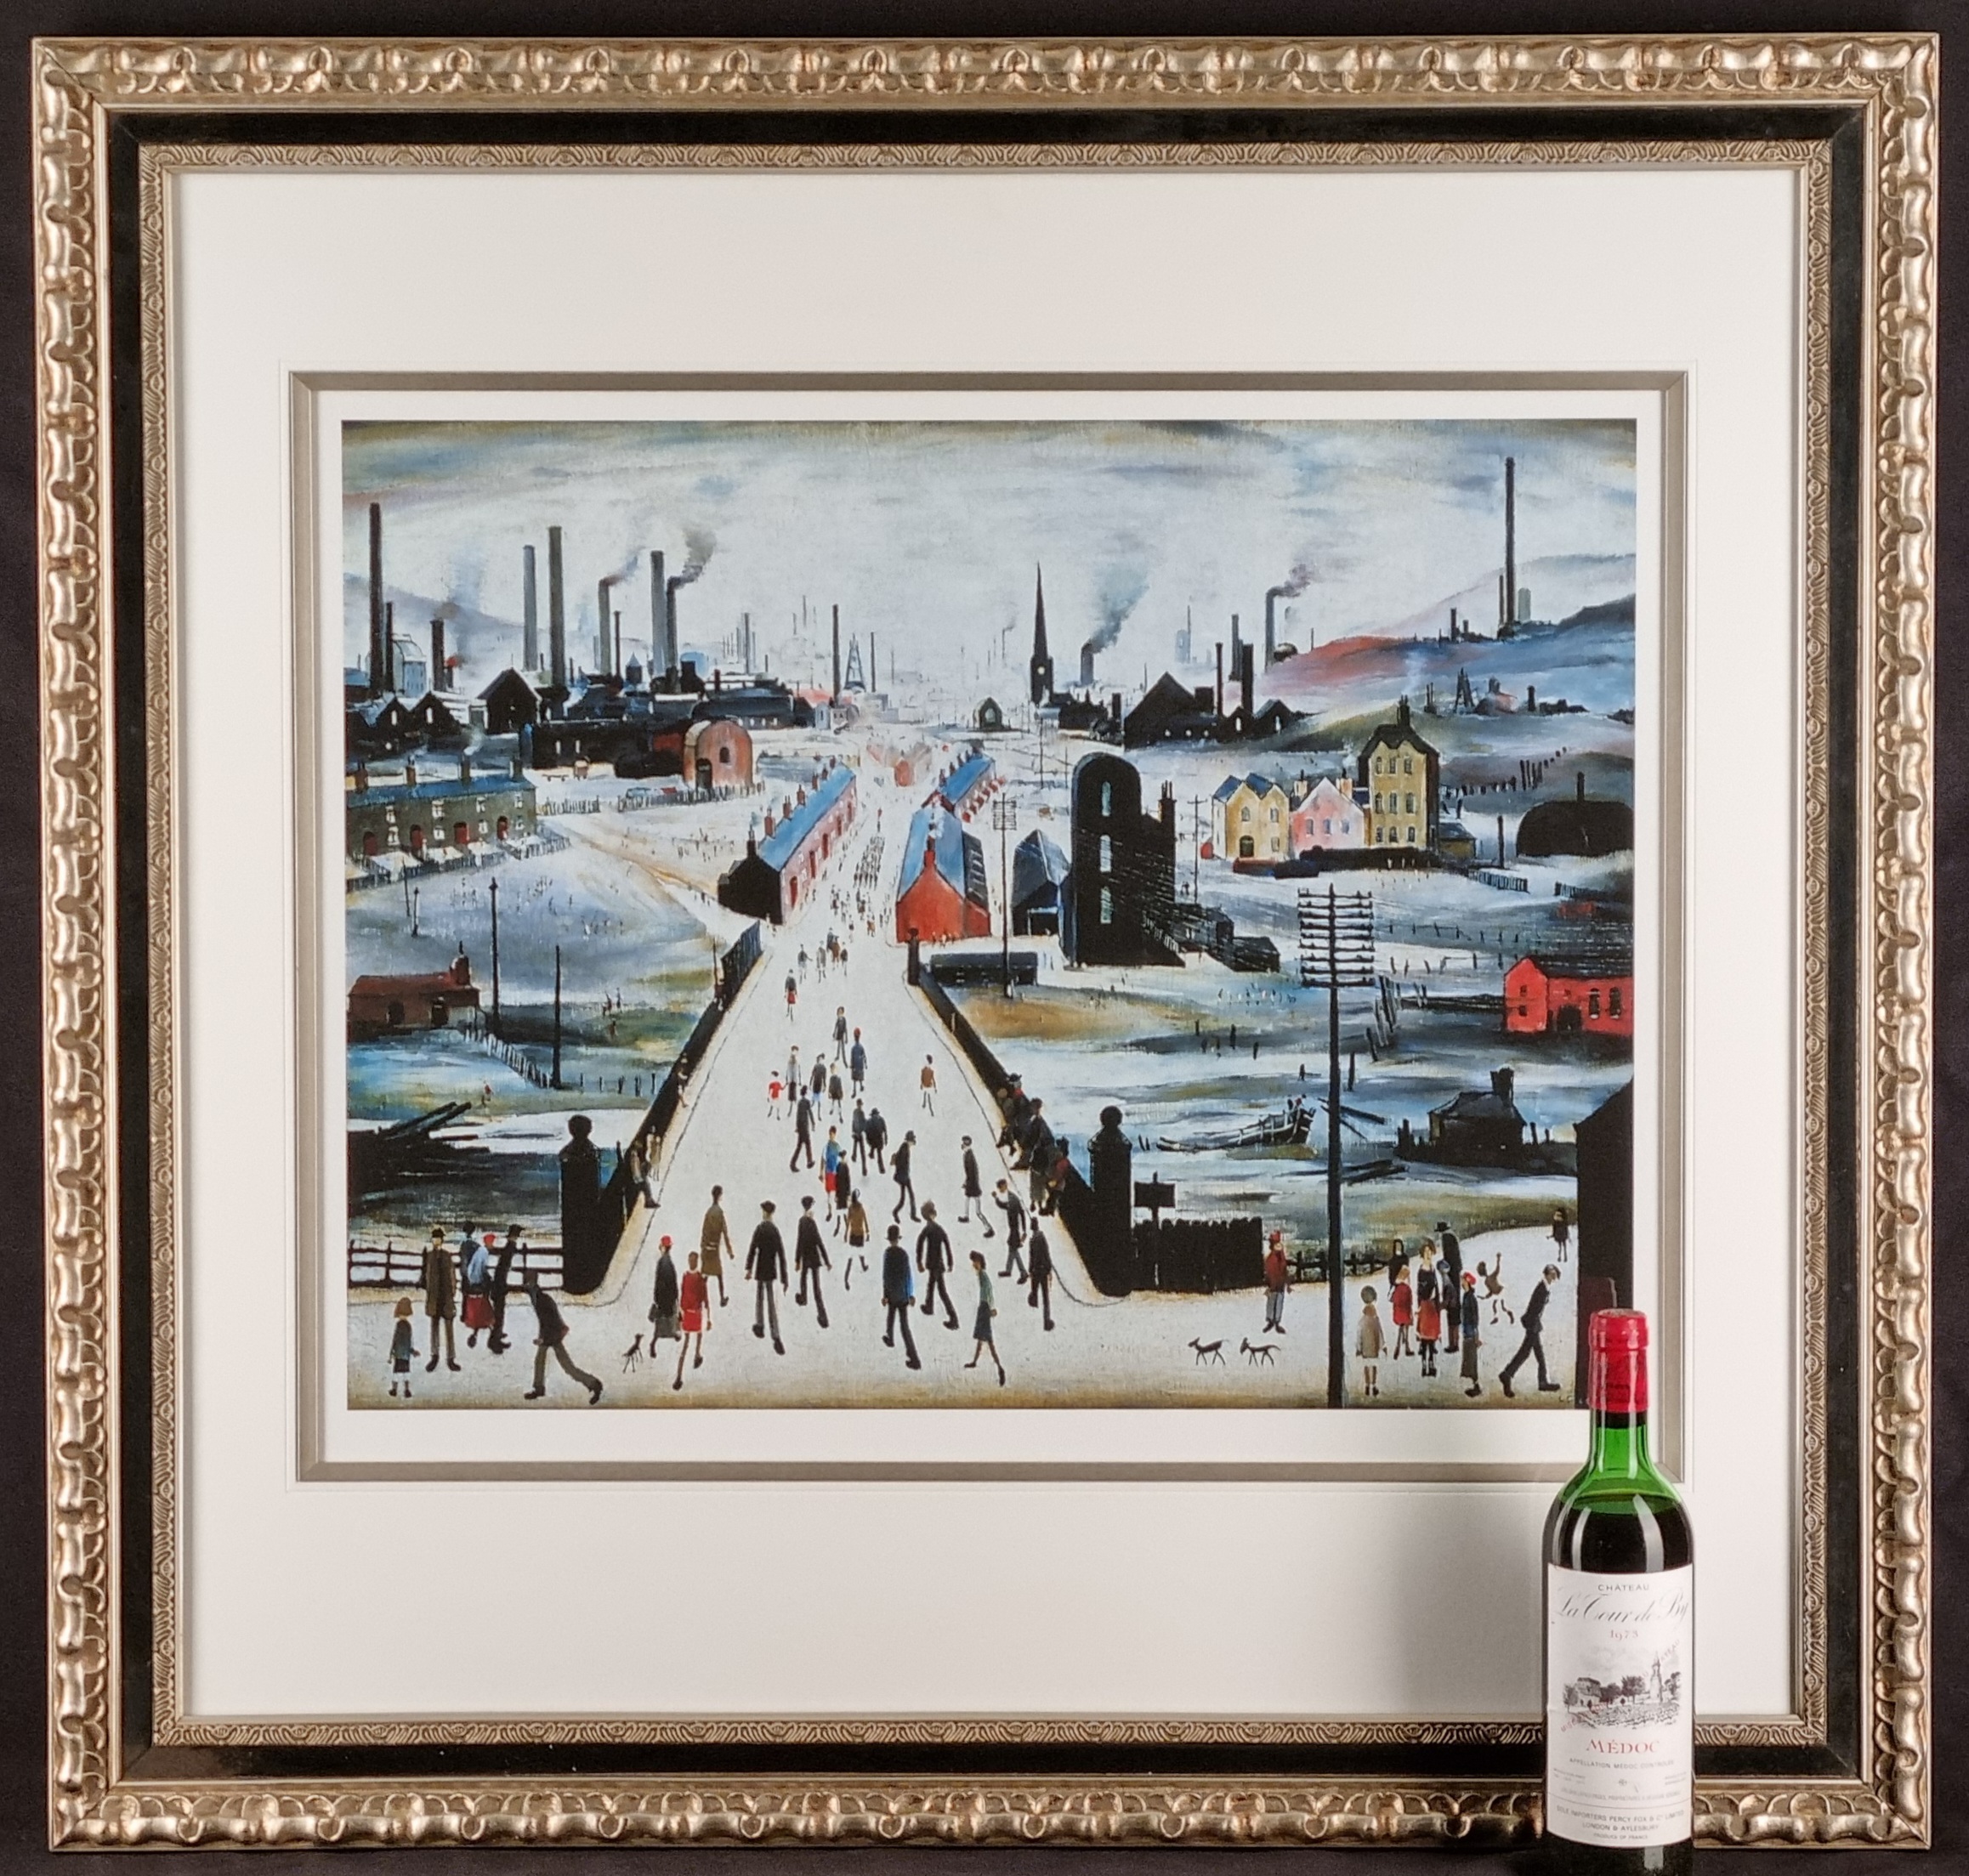 Limited Edition by L.S. Lowry titled "The Canal Bridge, 1949".